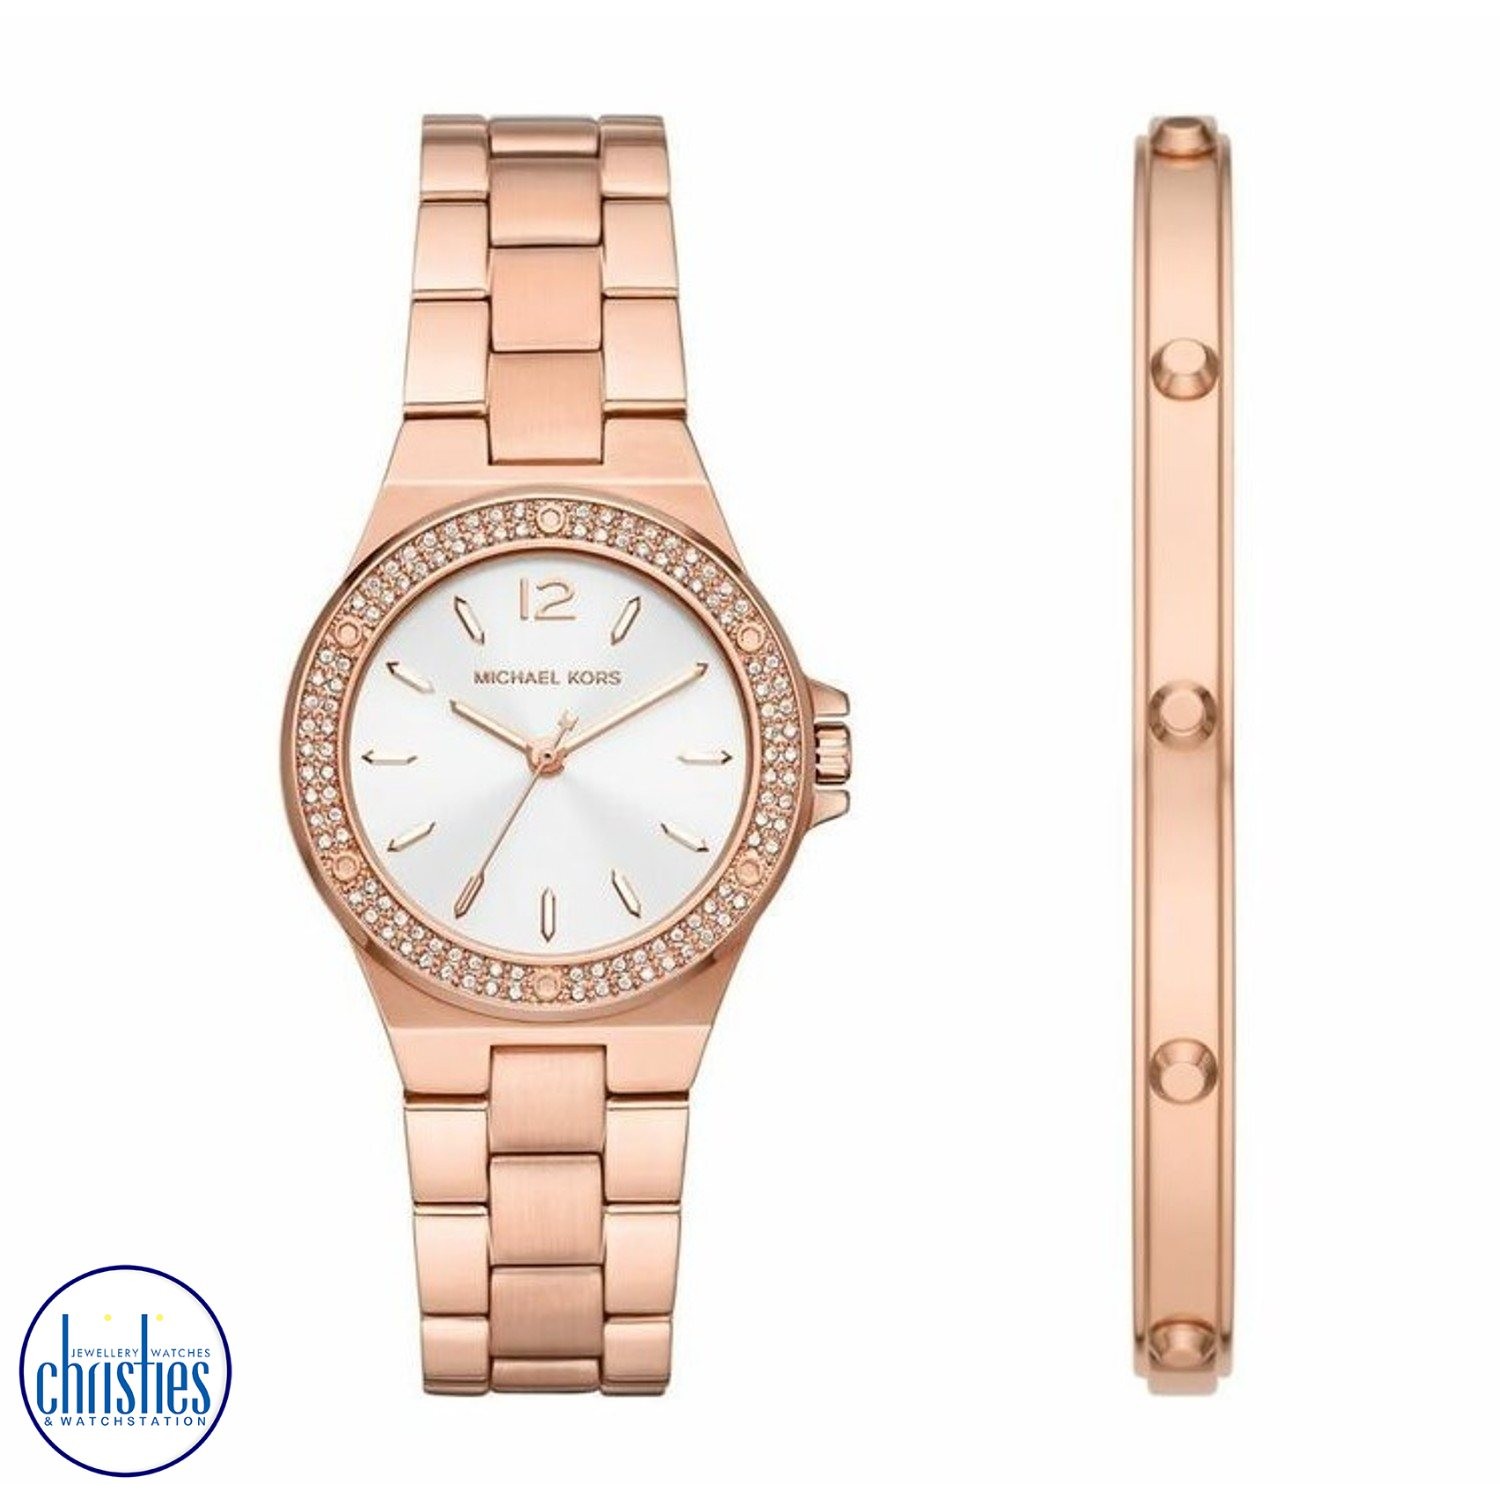 MK1073SET Michael Kors Rose Gold Lennox Watch And Bracelet Gift Set. MK1073SET Michael Kors Rose Gold Lennox Watch And Bracelet Gift Set is a stunning combination of style and functionality.